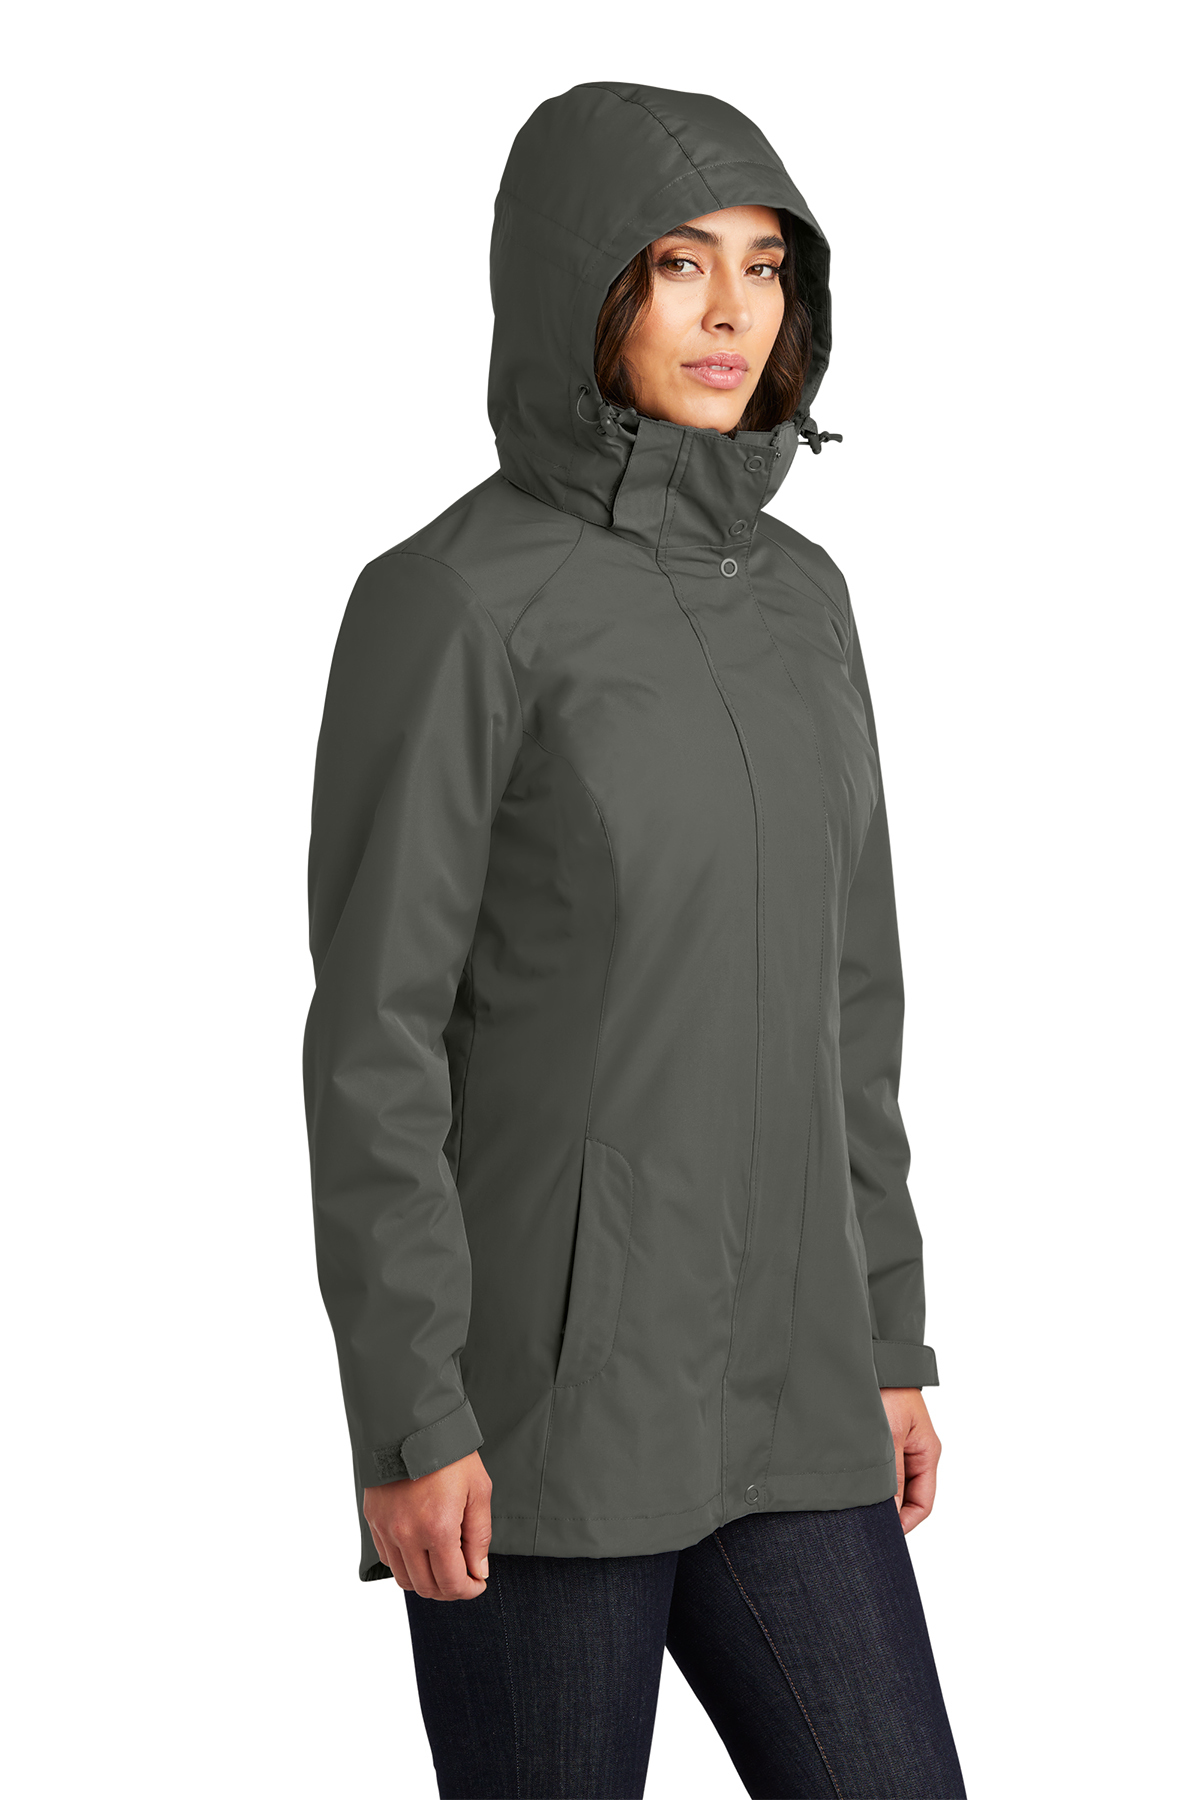 Port Authority Ladies All-Weather 3-in-1 Jacket | Product | Company Casuals